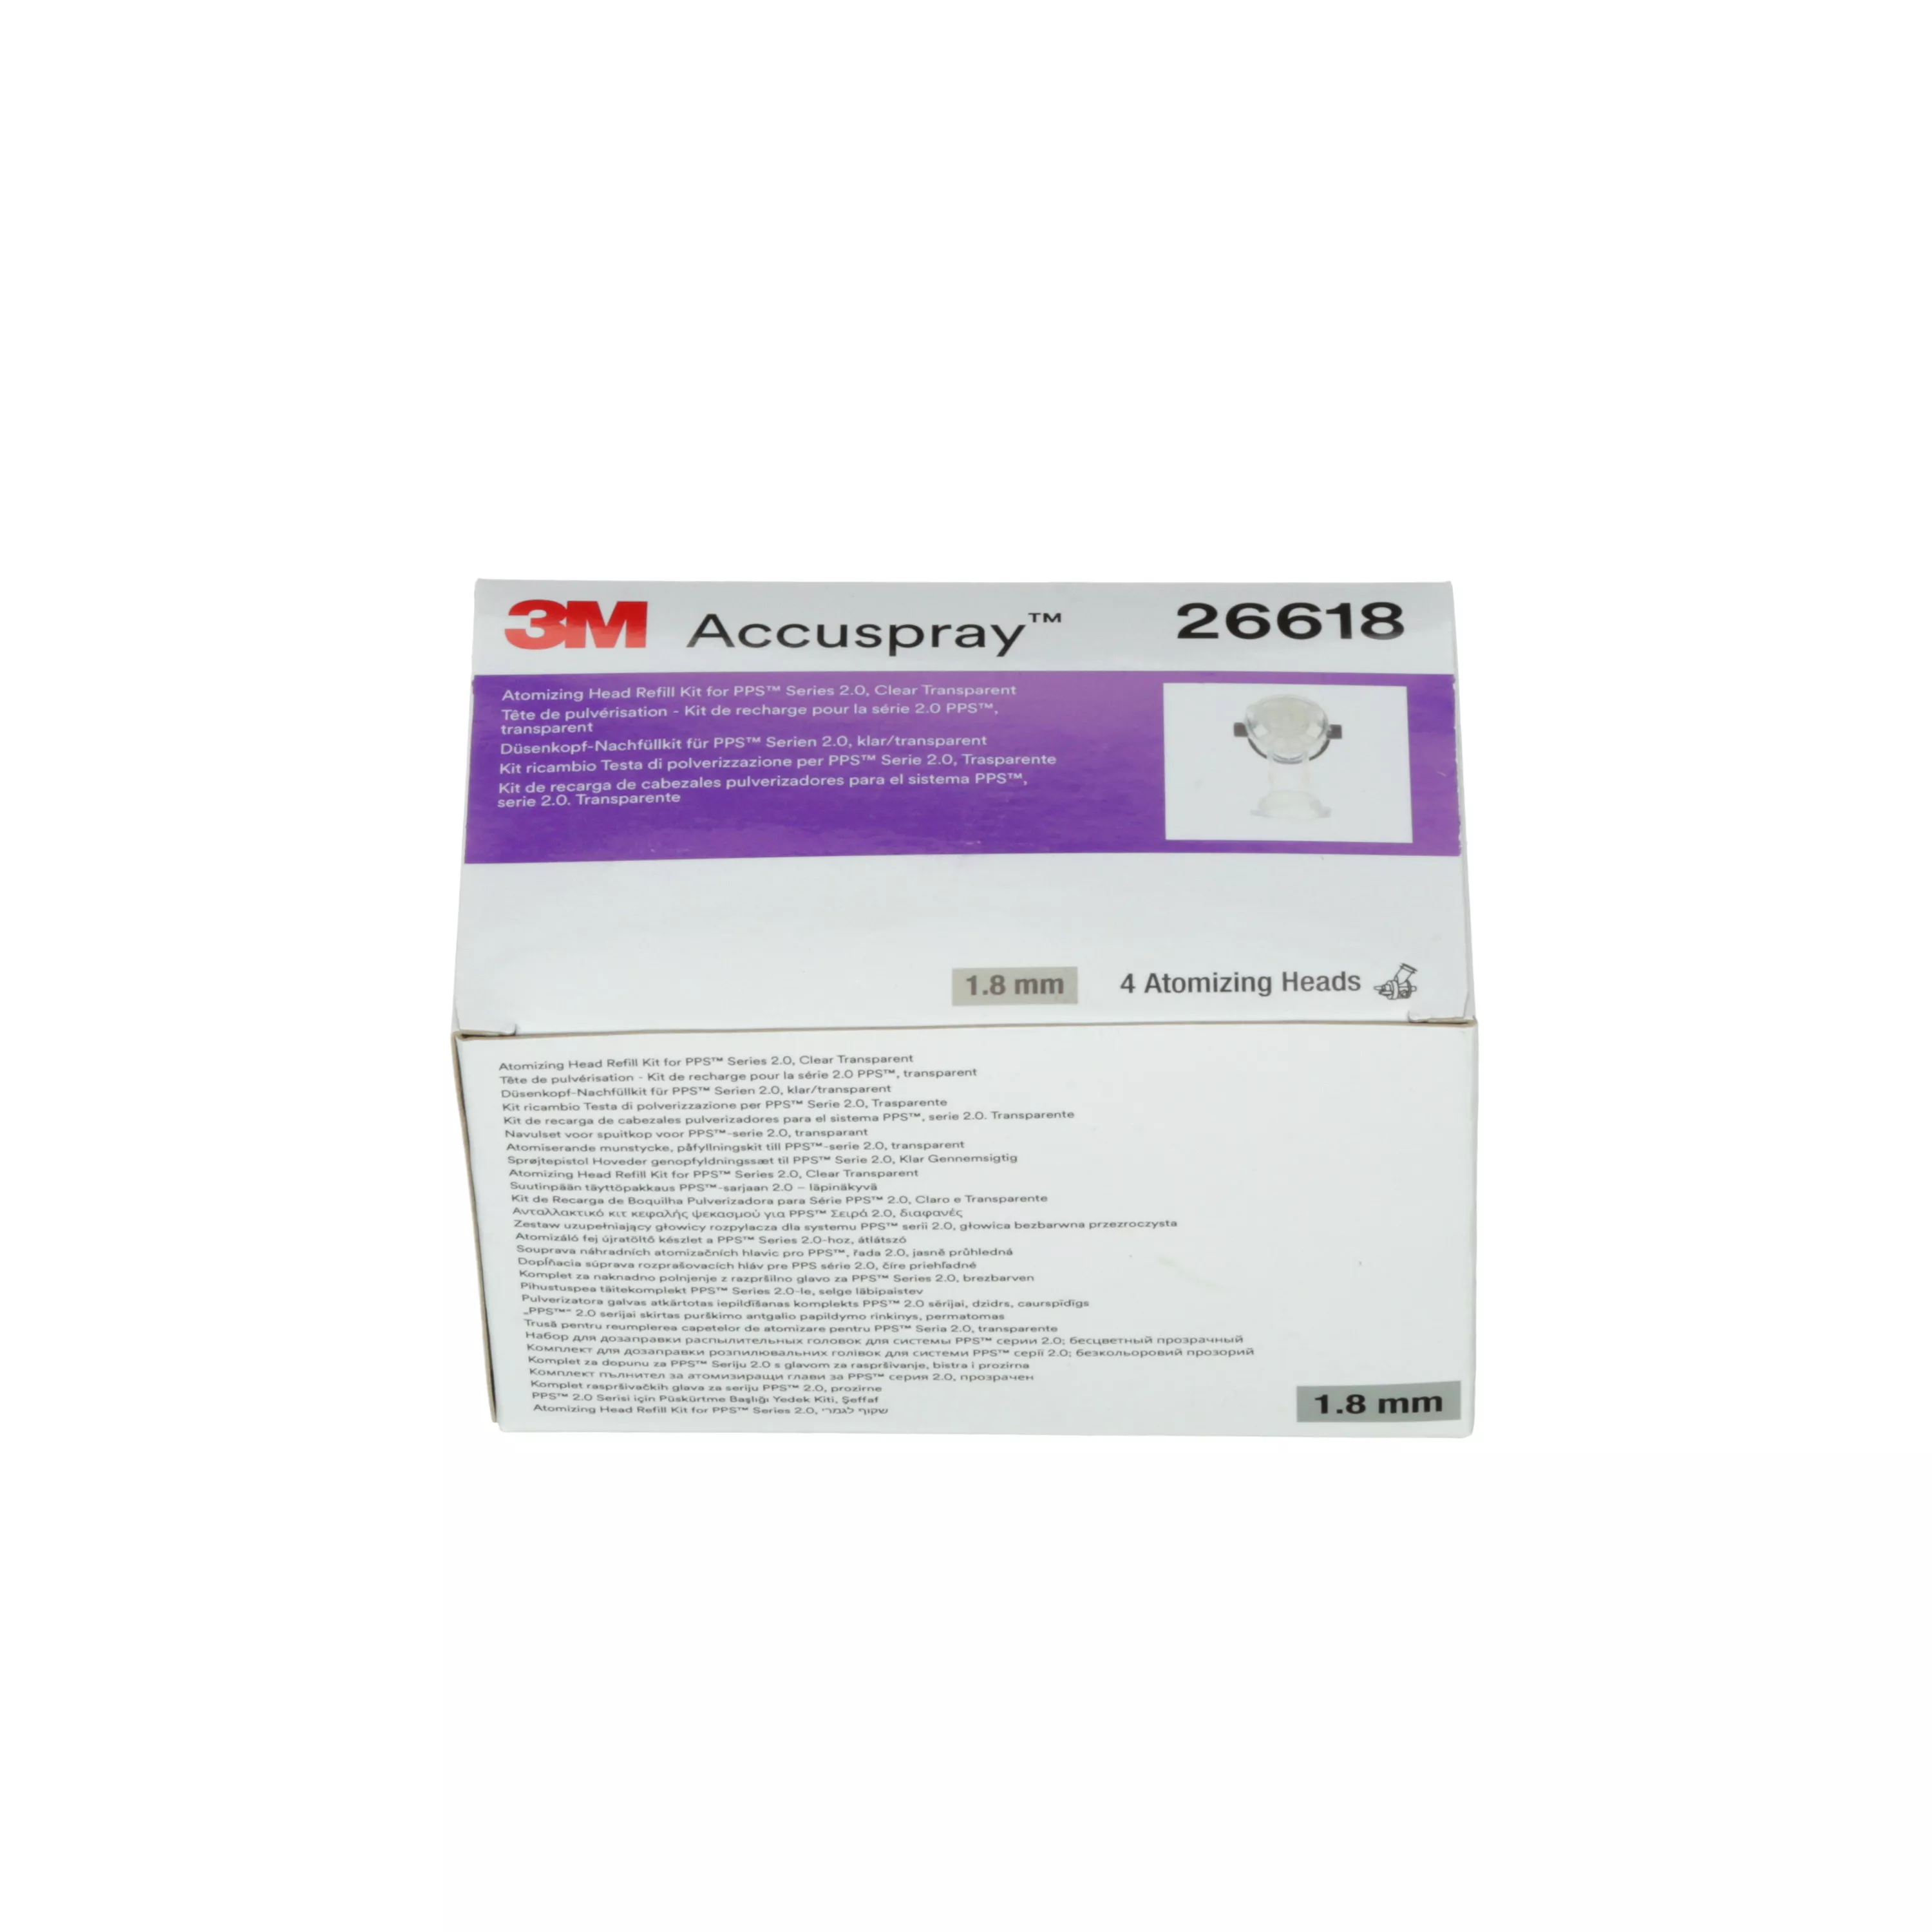 SKU 7100141416 | 3M™ Accuspray™ Atomizing Head Refill Pack for 3M™ PPS™ Series 2.0